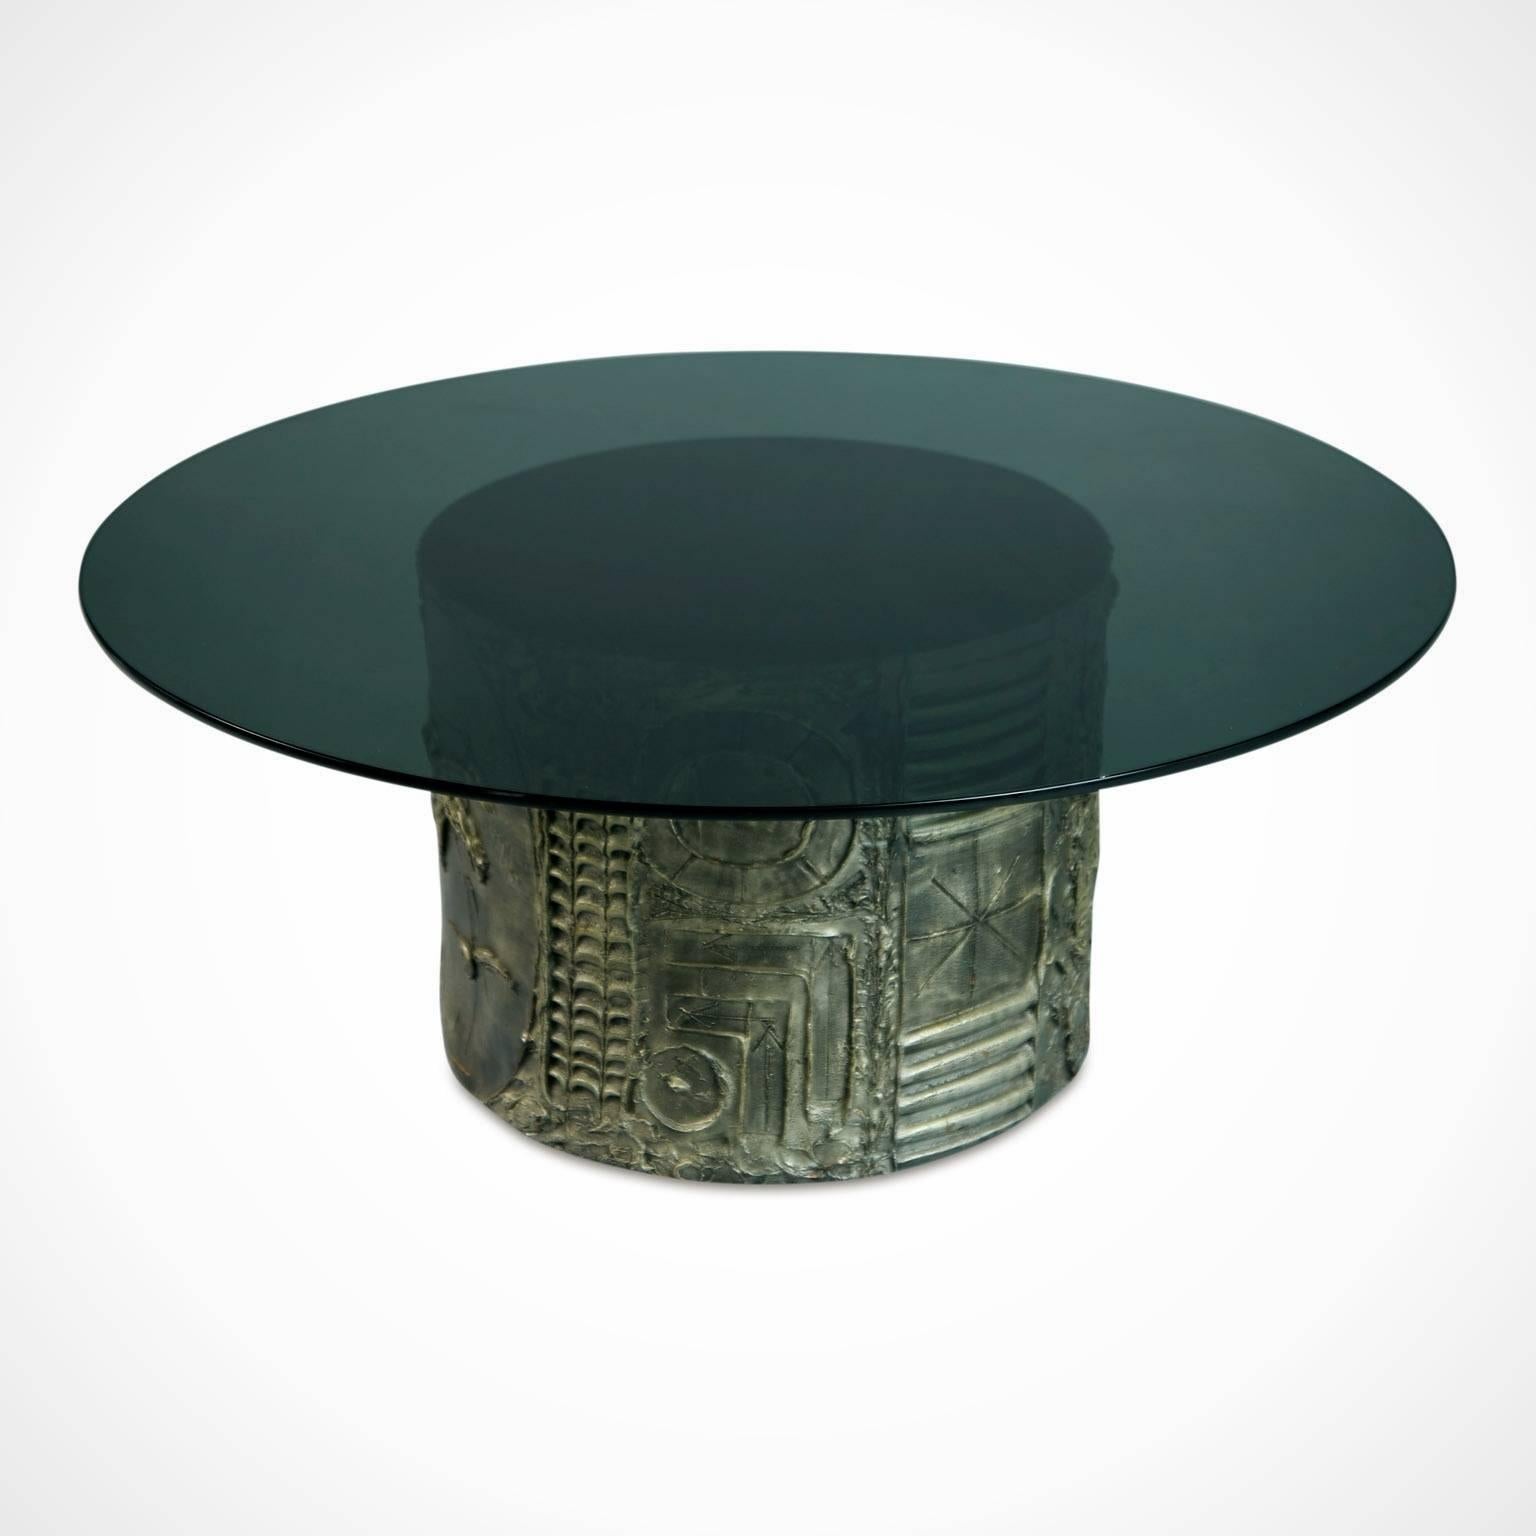 Brutalist style coffee table by Pearsall for Craft Associates. This coffee table is fabricated from pewter colored cast resin featuring Pearsall's signature etchings carved into the drum base and is topped with a broad, circular smoked glass